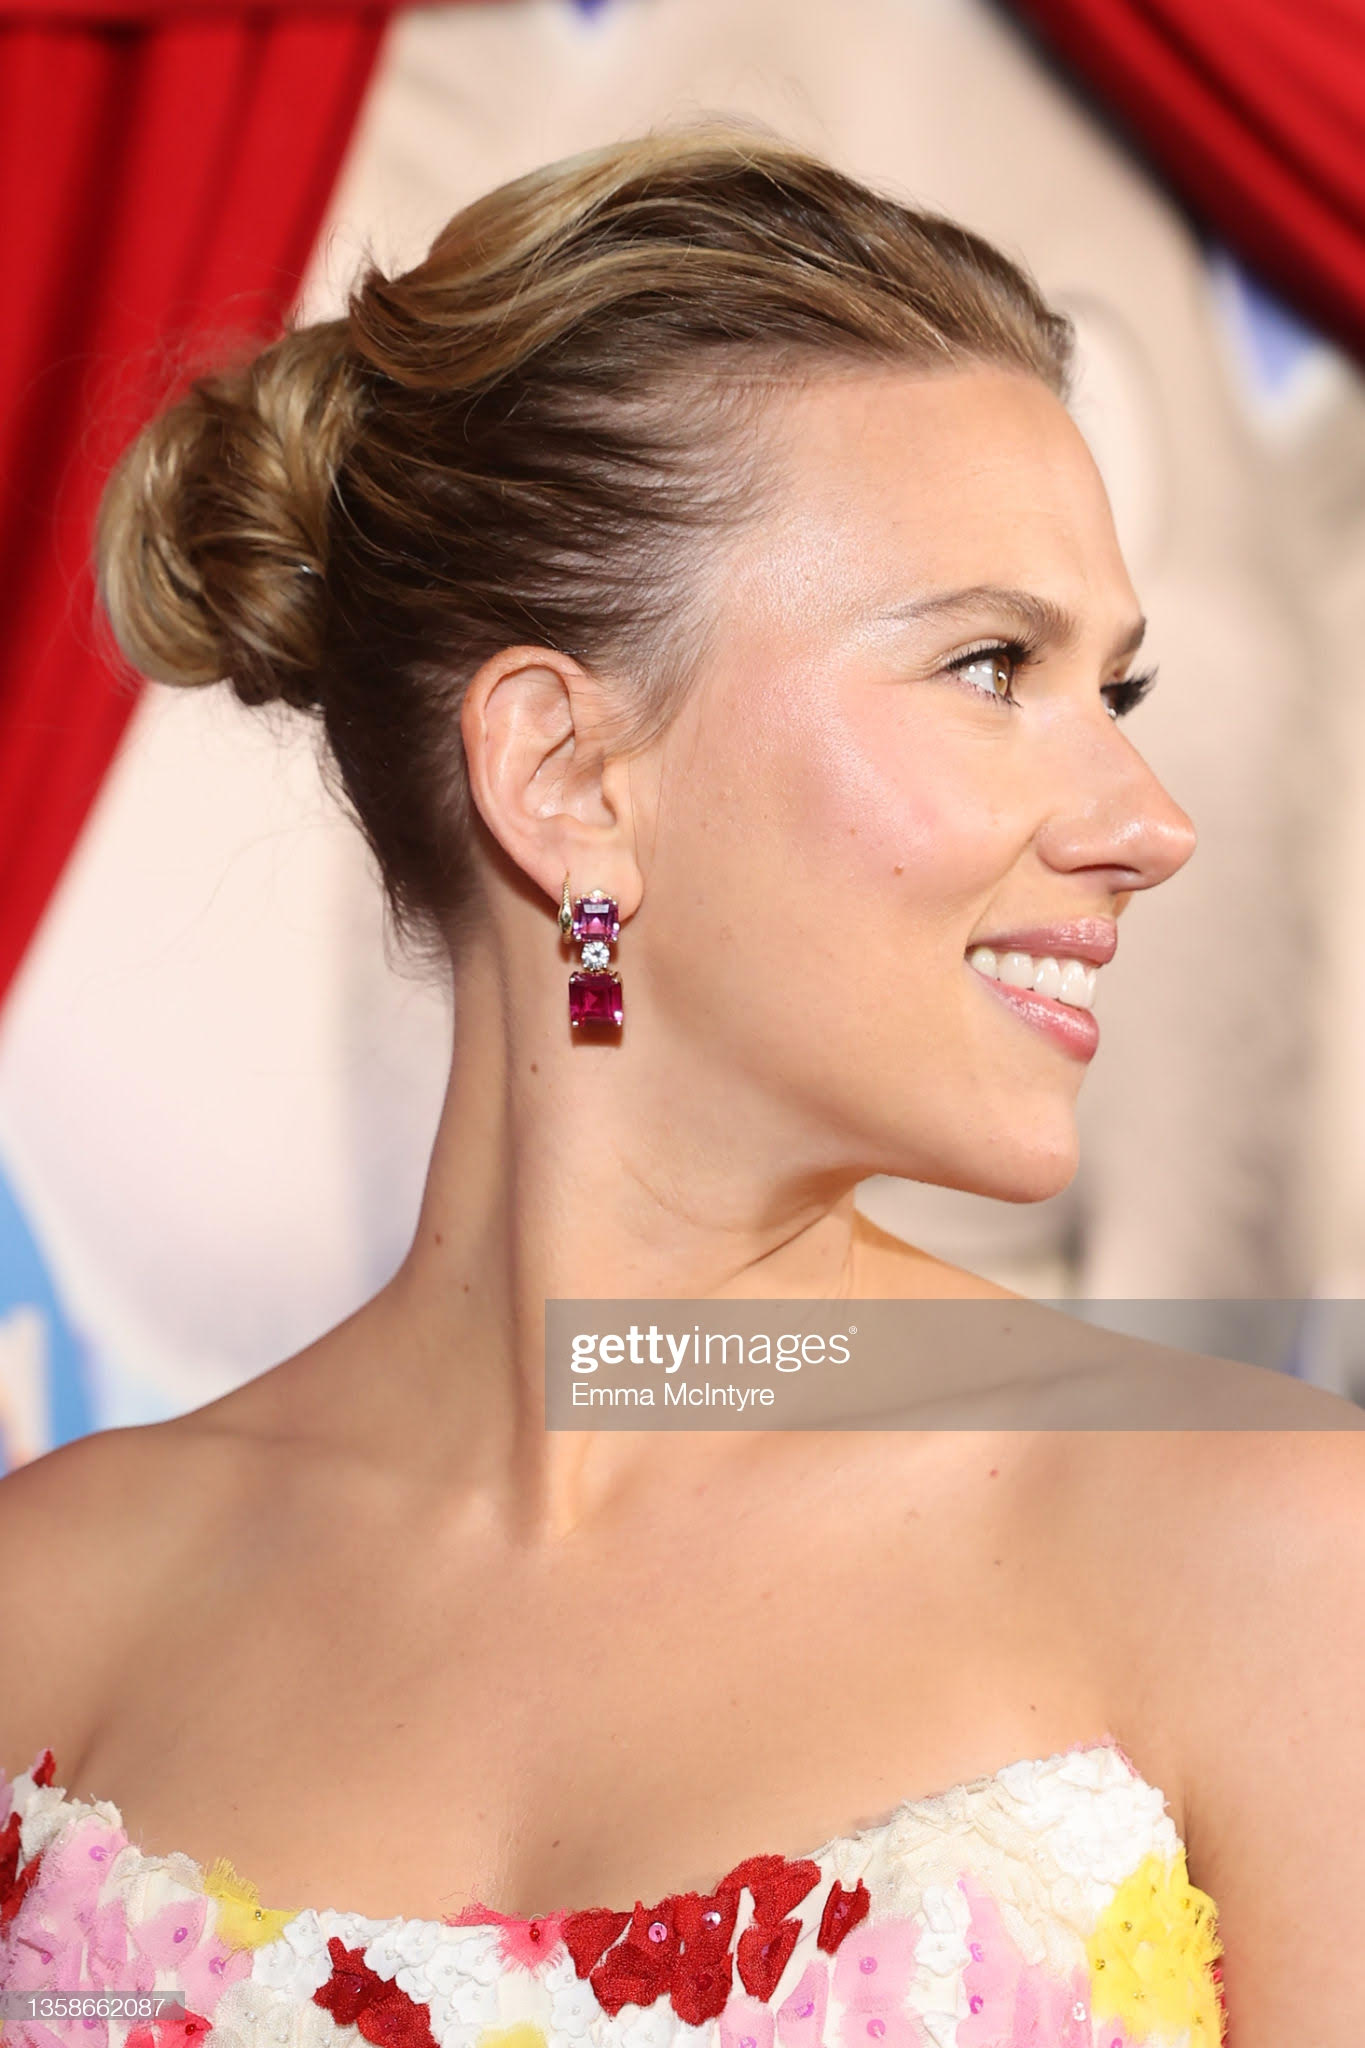 Scarlett Johansson wore Candy Ice earrings @ the Sing 2 Premiere on December 12th in Los Angeles, California.